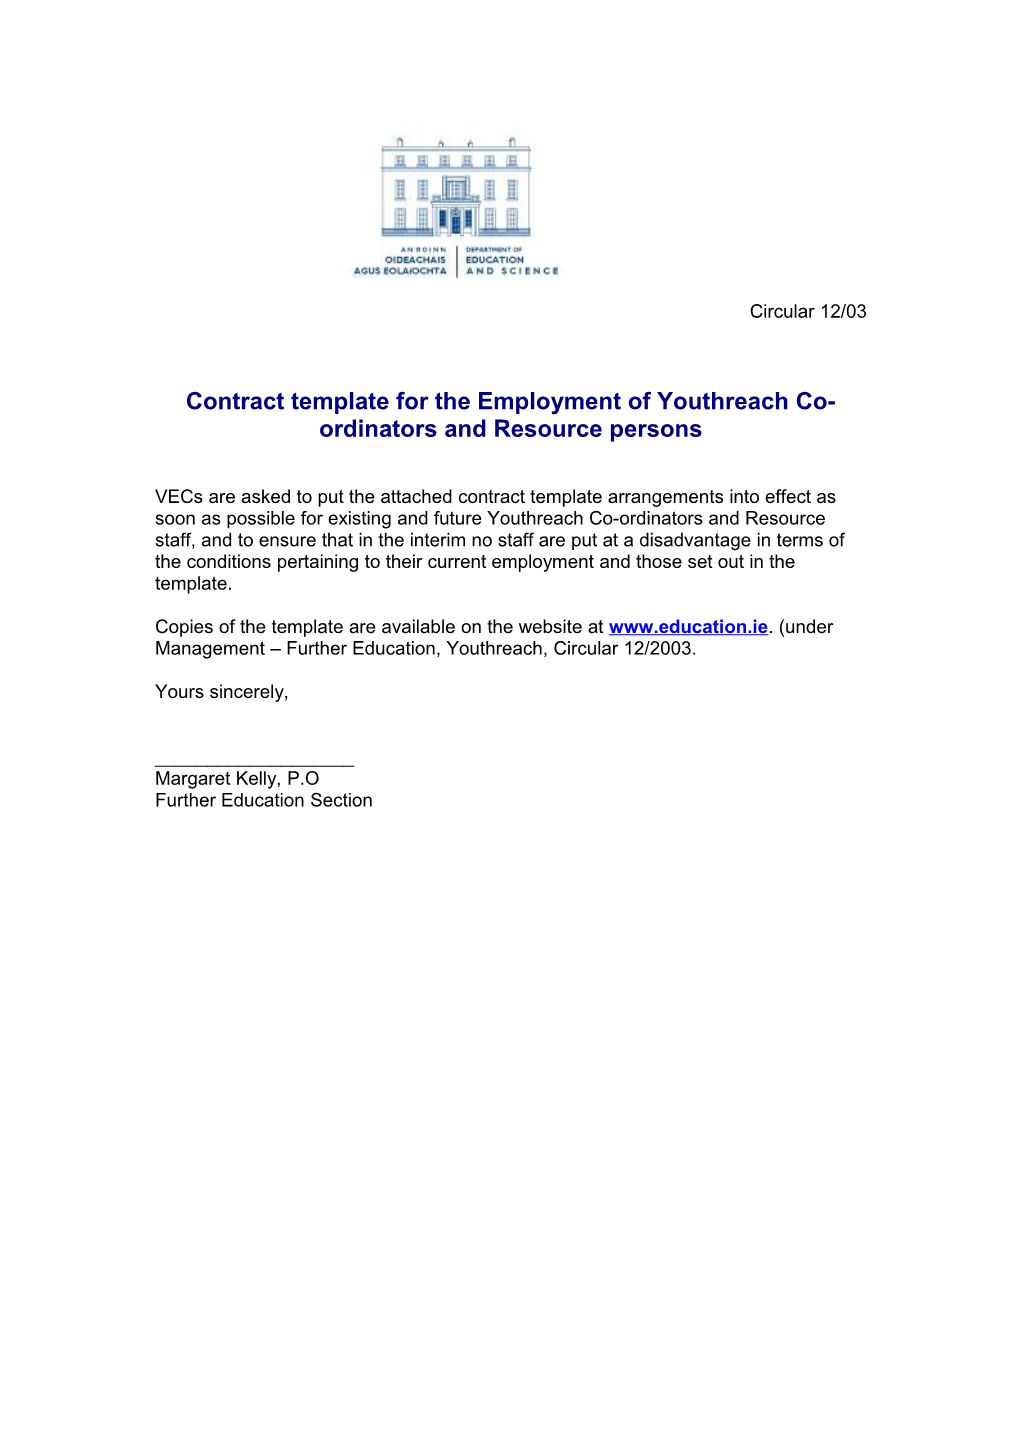 Circular 12/03 - Contract Template for the Employment of Youthreach Co-Ordinators and Resource